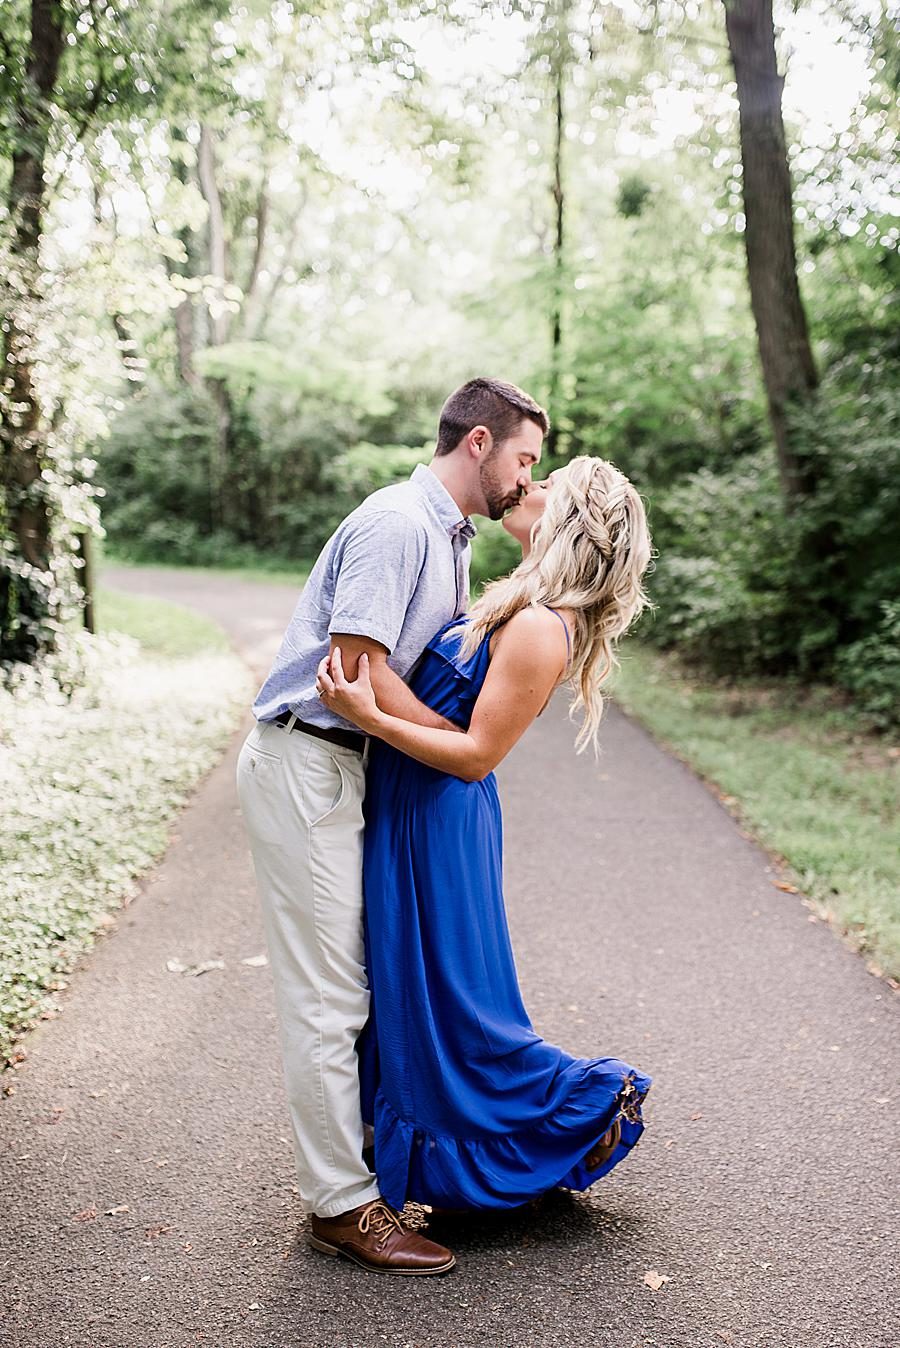 Dip kiss at this Forks of the River engagement by Knoxville Wedding Photographer, Amanda May Photos.